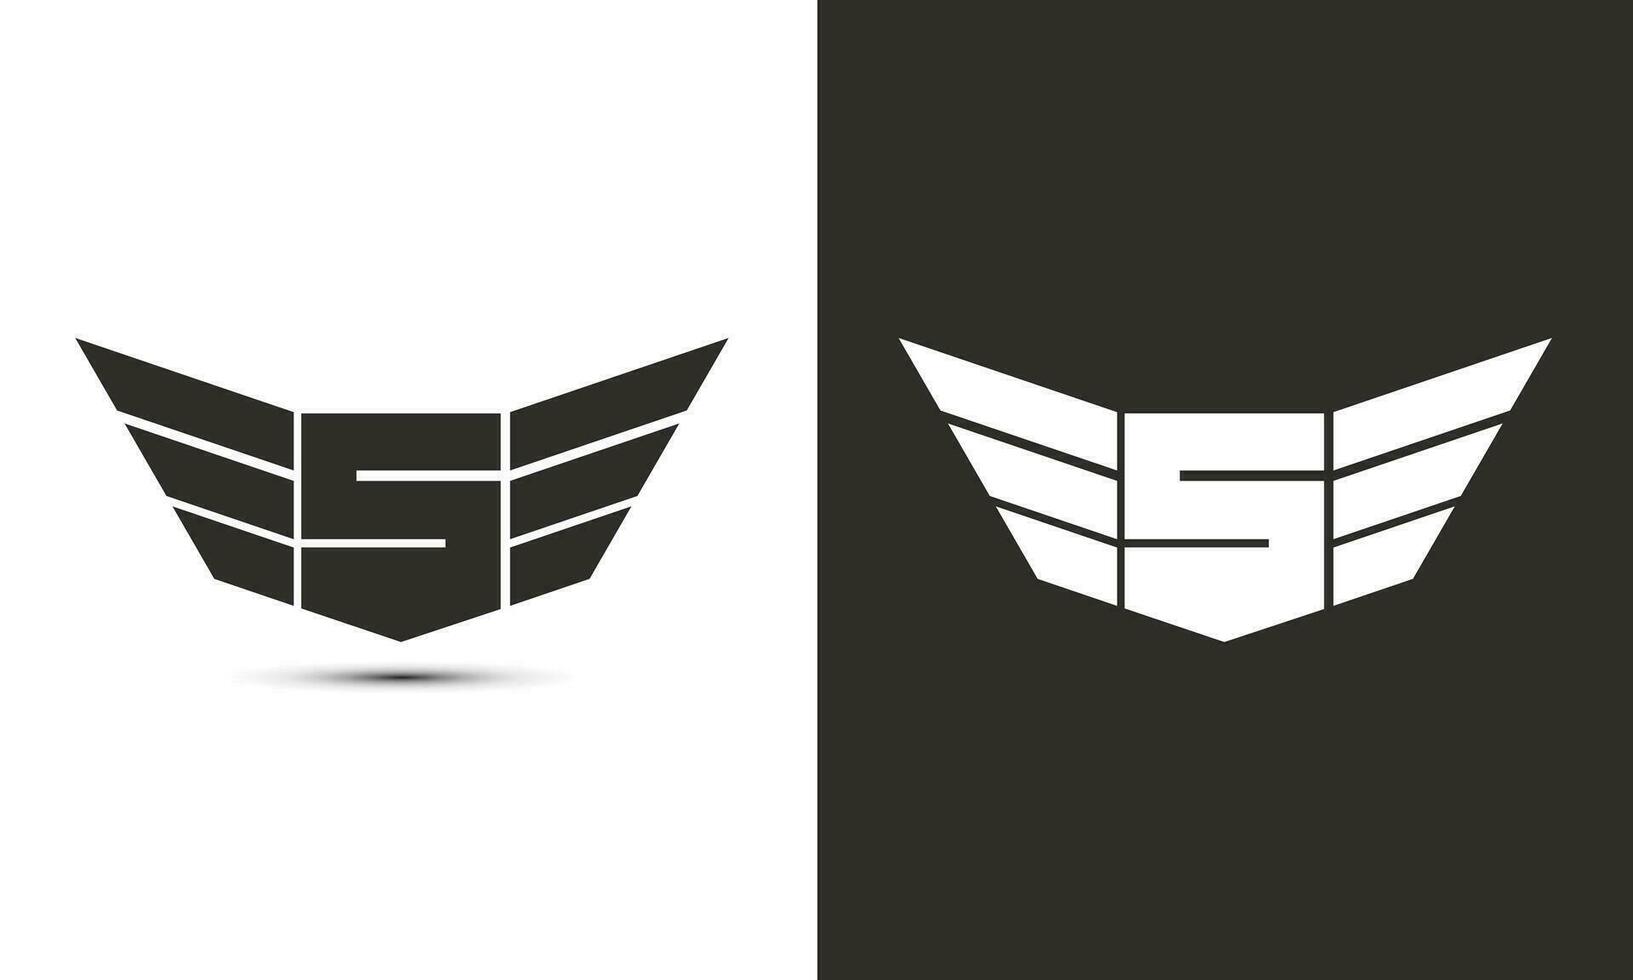 S logo in black and white color with wings and shield vector